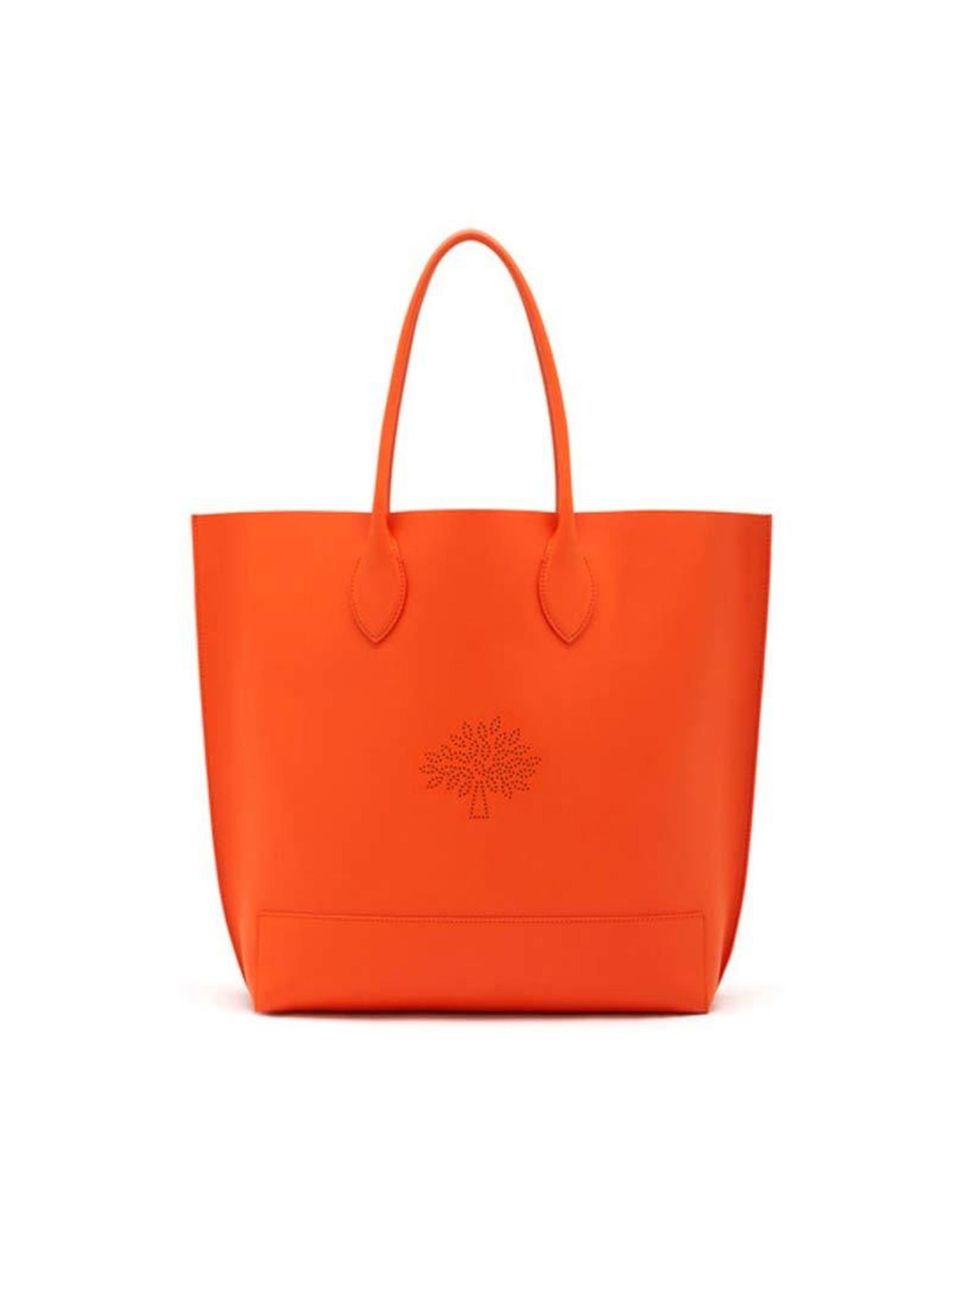 <p>Give a winter palette of navy and charcoal grey a punch of colour.</p>

<p><a href="http://www.mulberry.com/shop/whats-new/whats-new-all/blossom-tote-mandarin-calf-nappa" target="_blank">Mulberry</a> tote, £495</p>